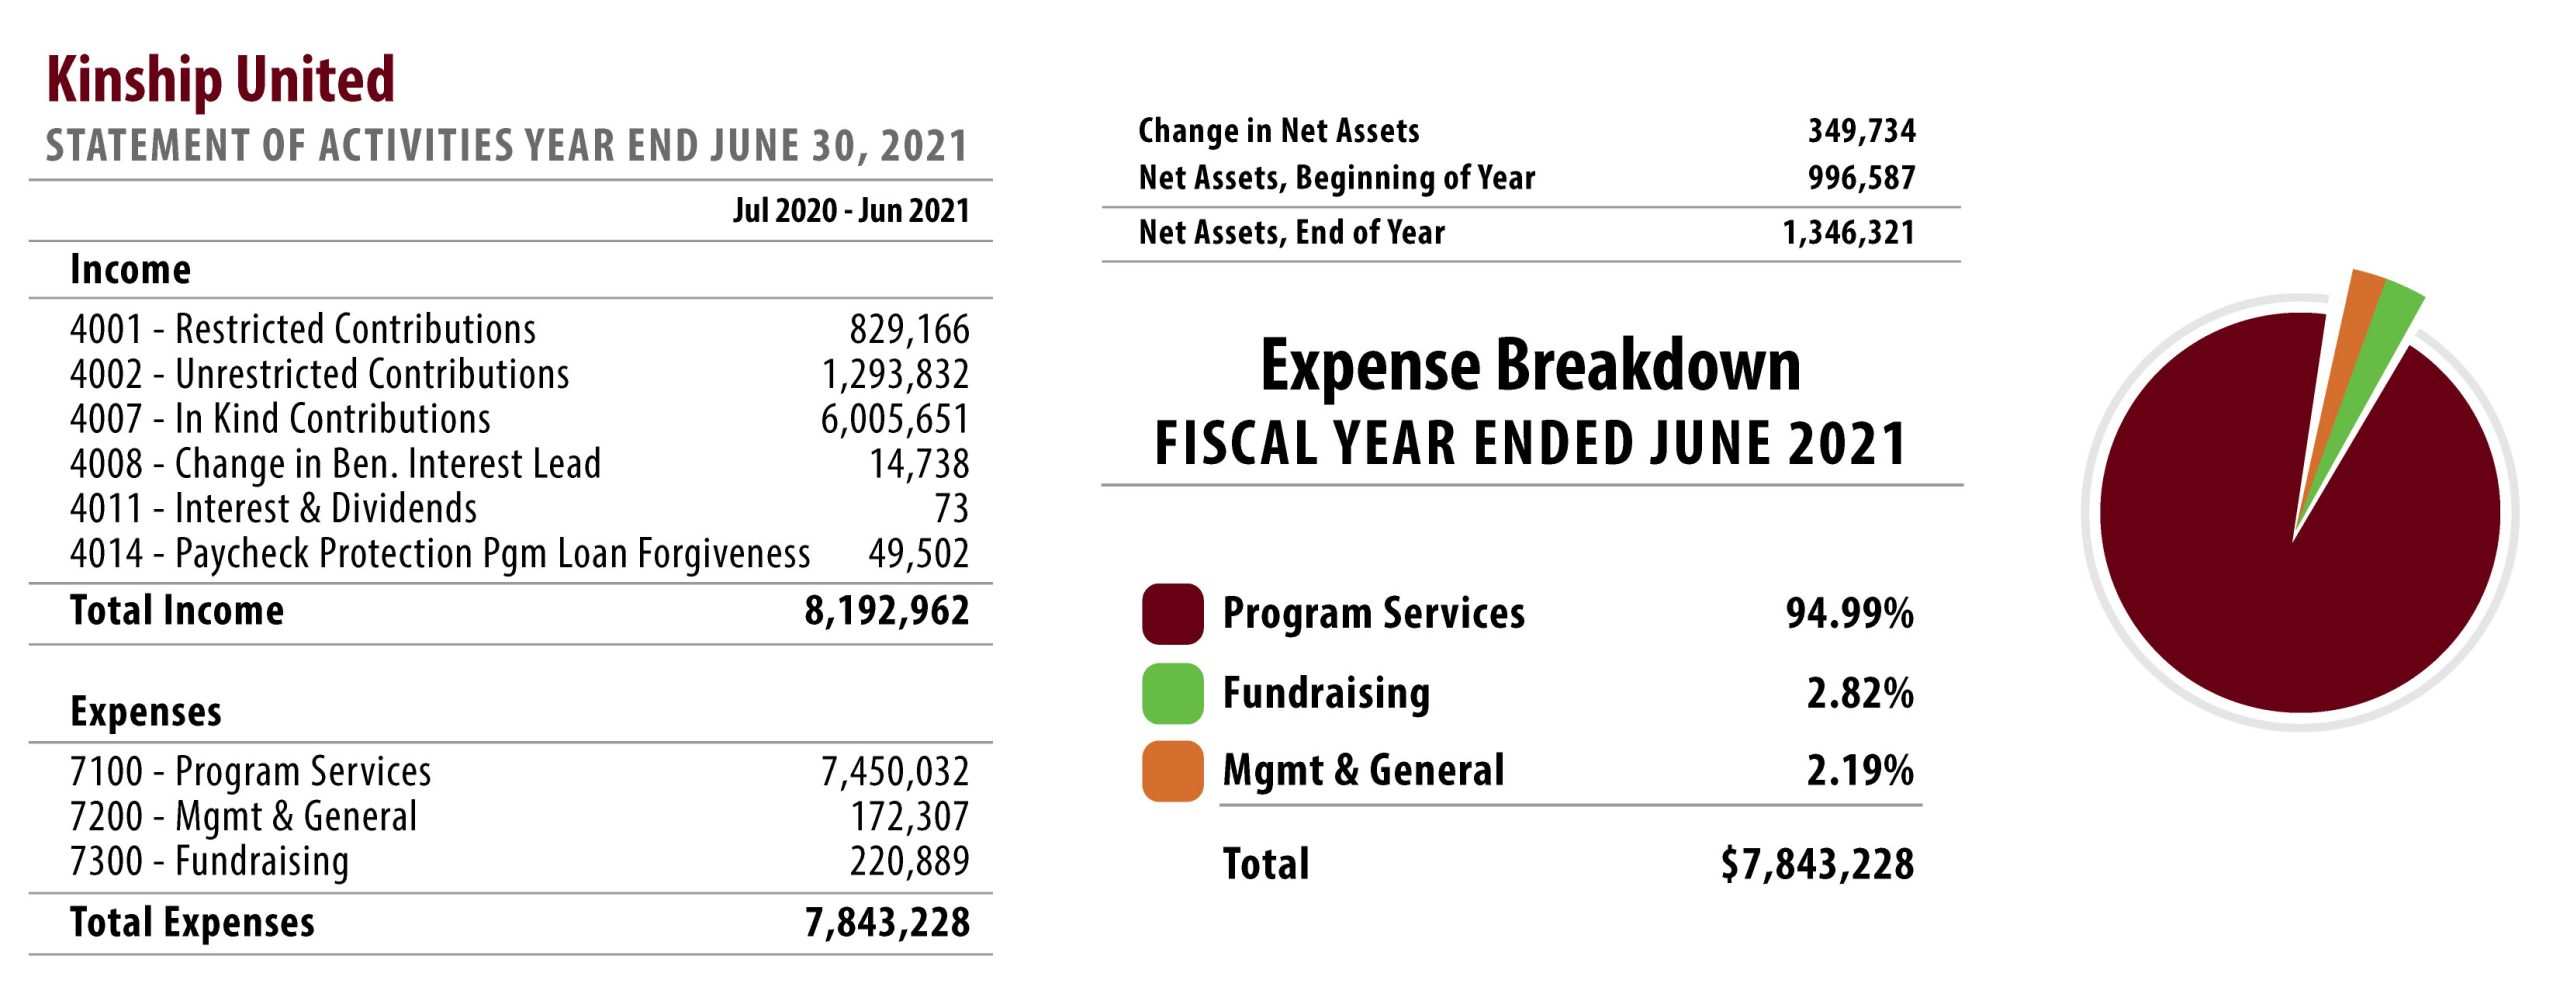 Kinship United's statement of activities and a pie chart depicting our expense breakdown for the fiscal year ending in June 2021.